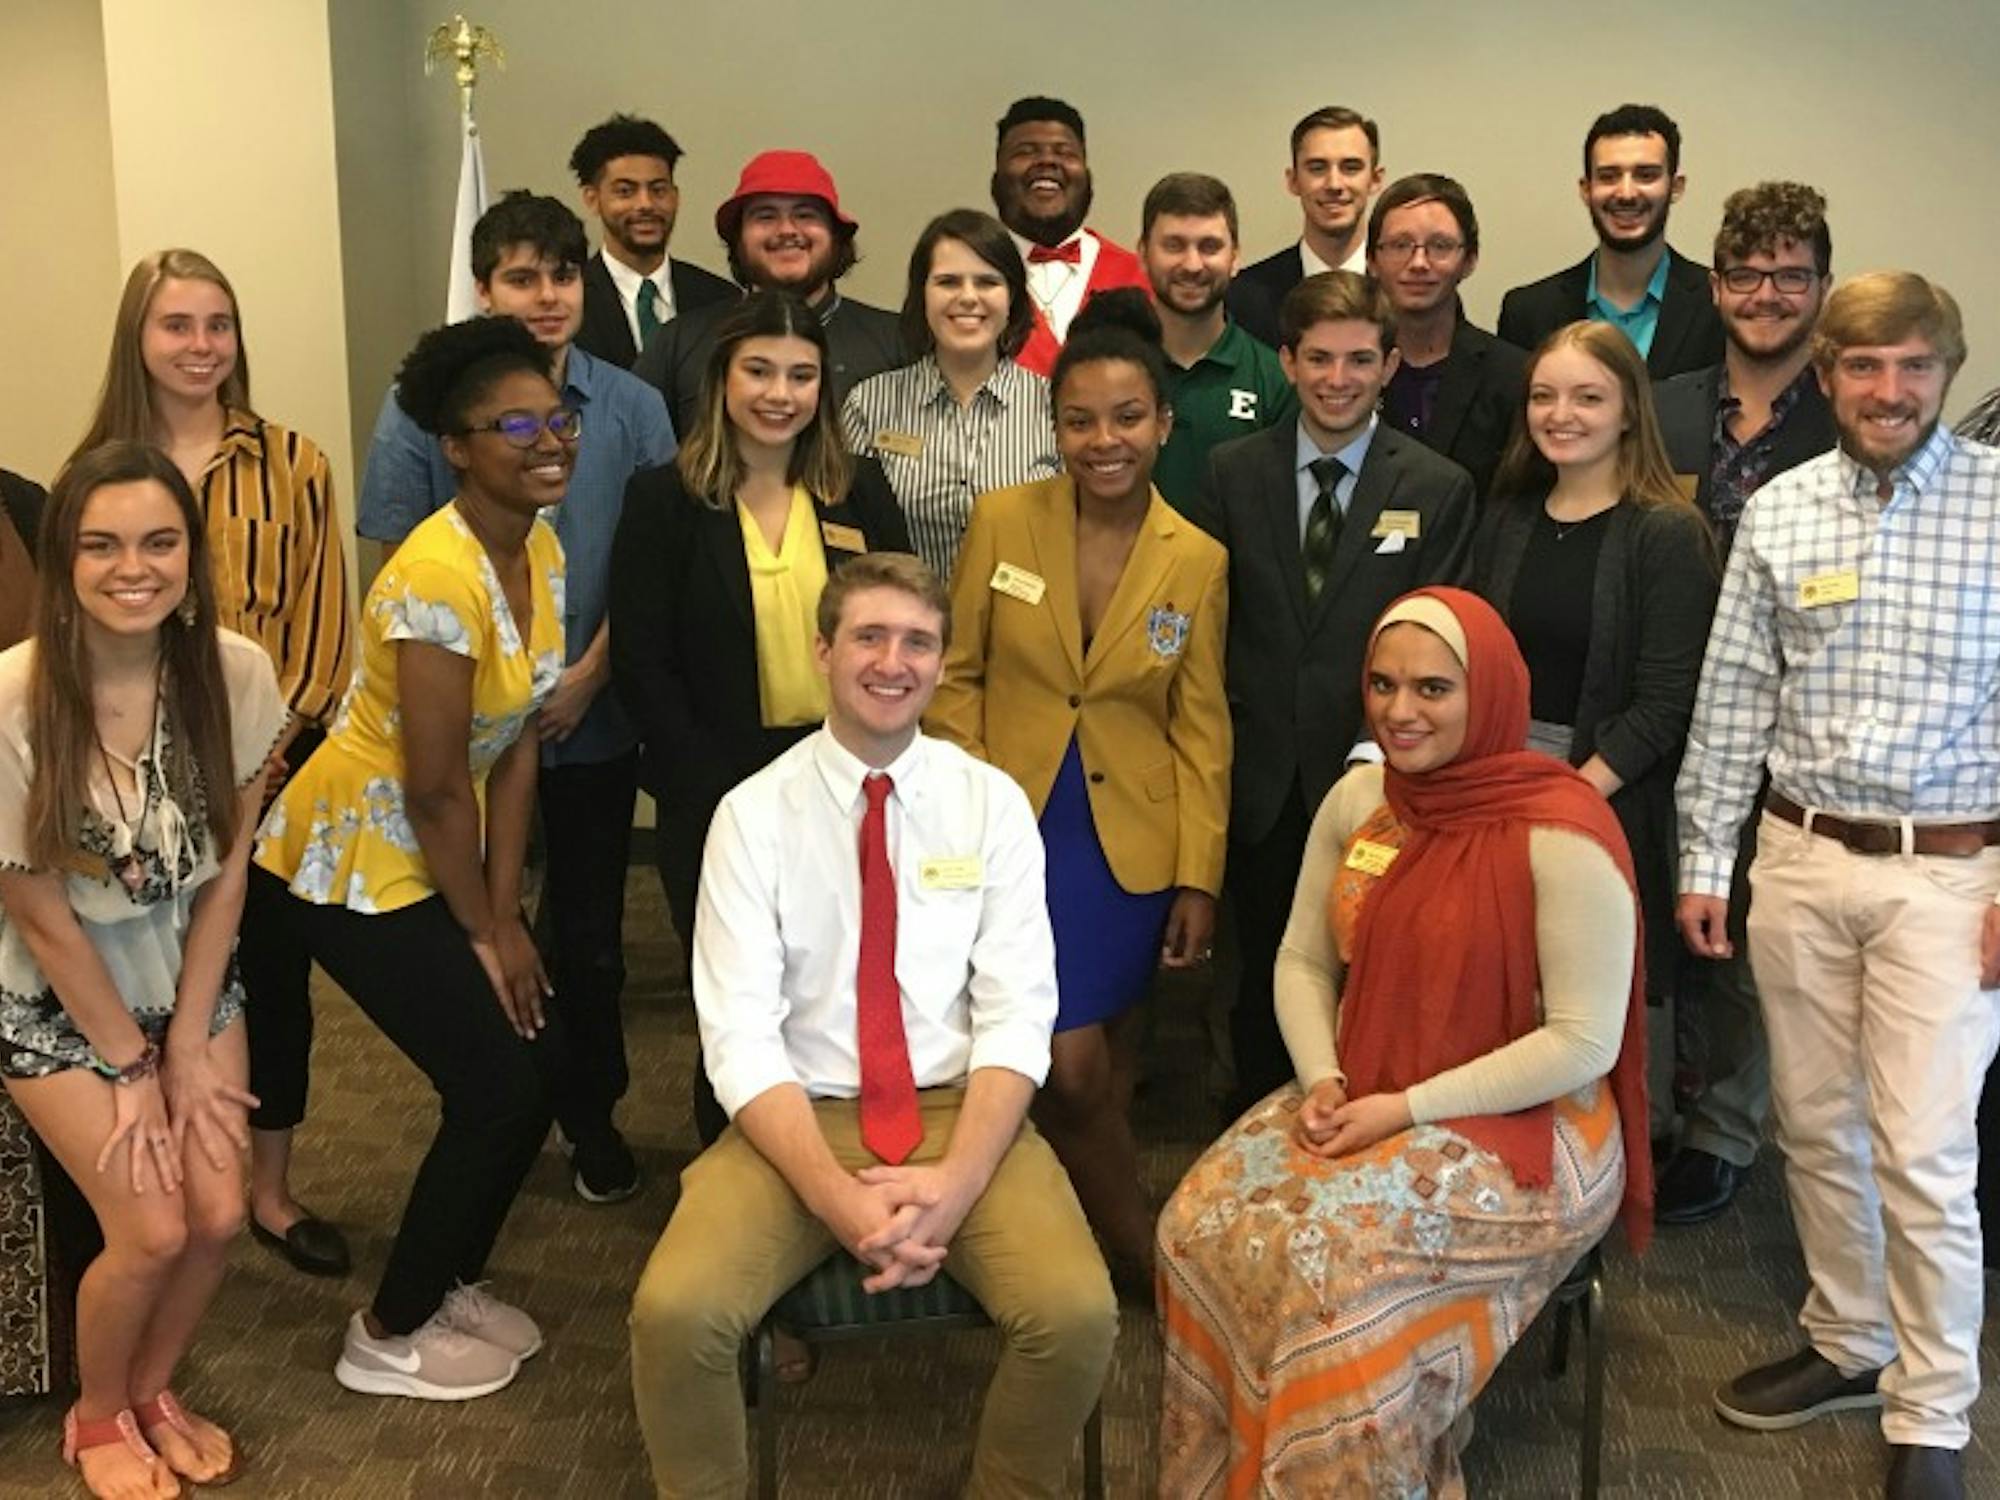 2019 EMU Student Government members